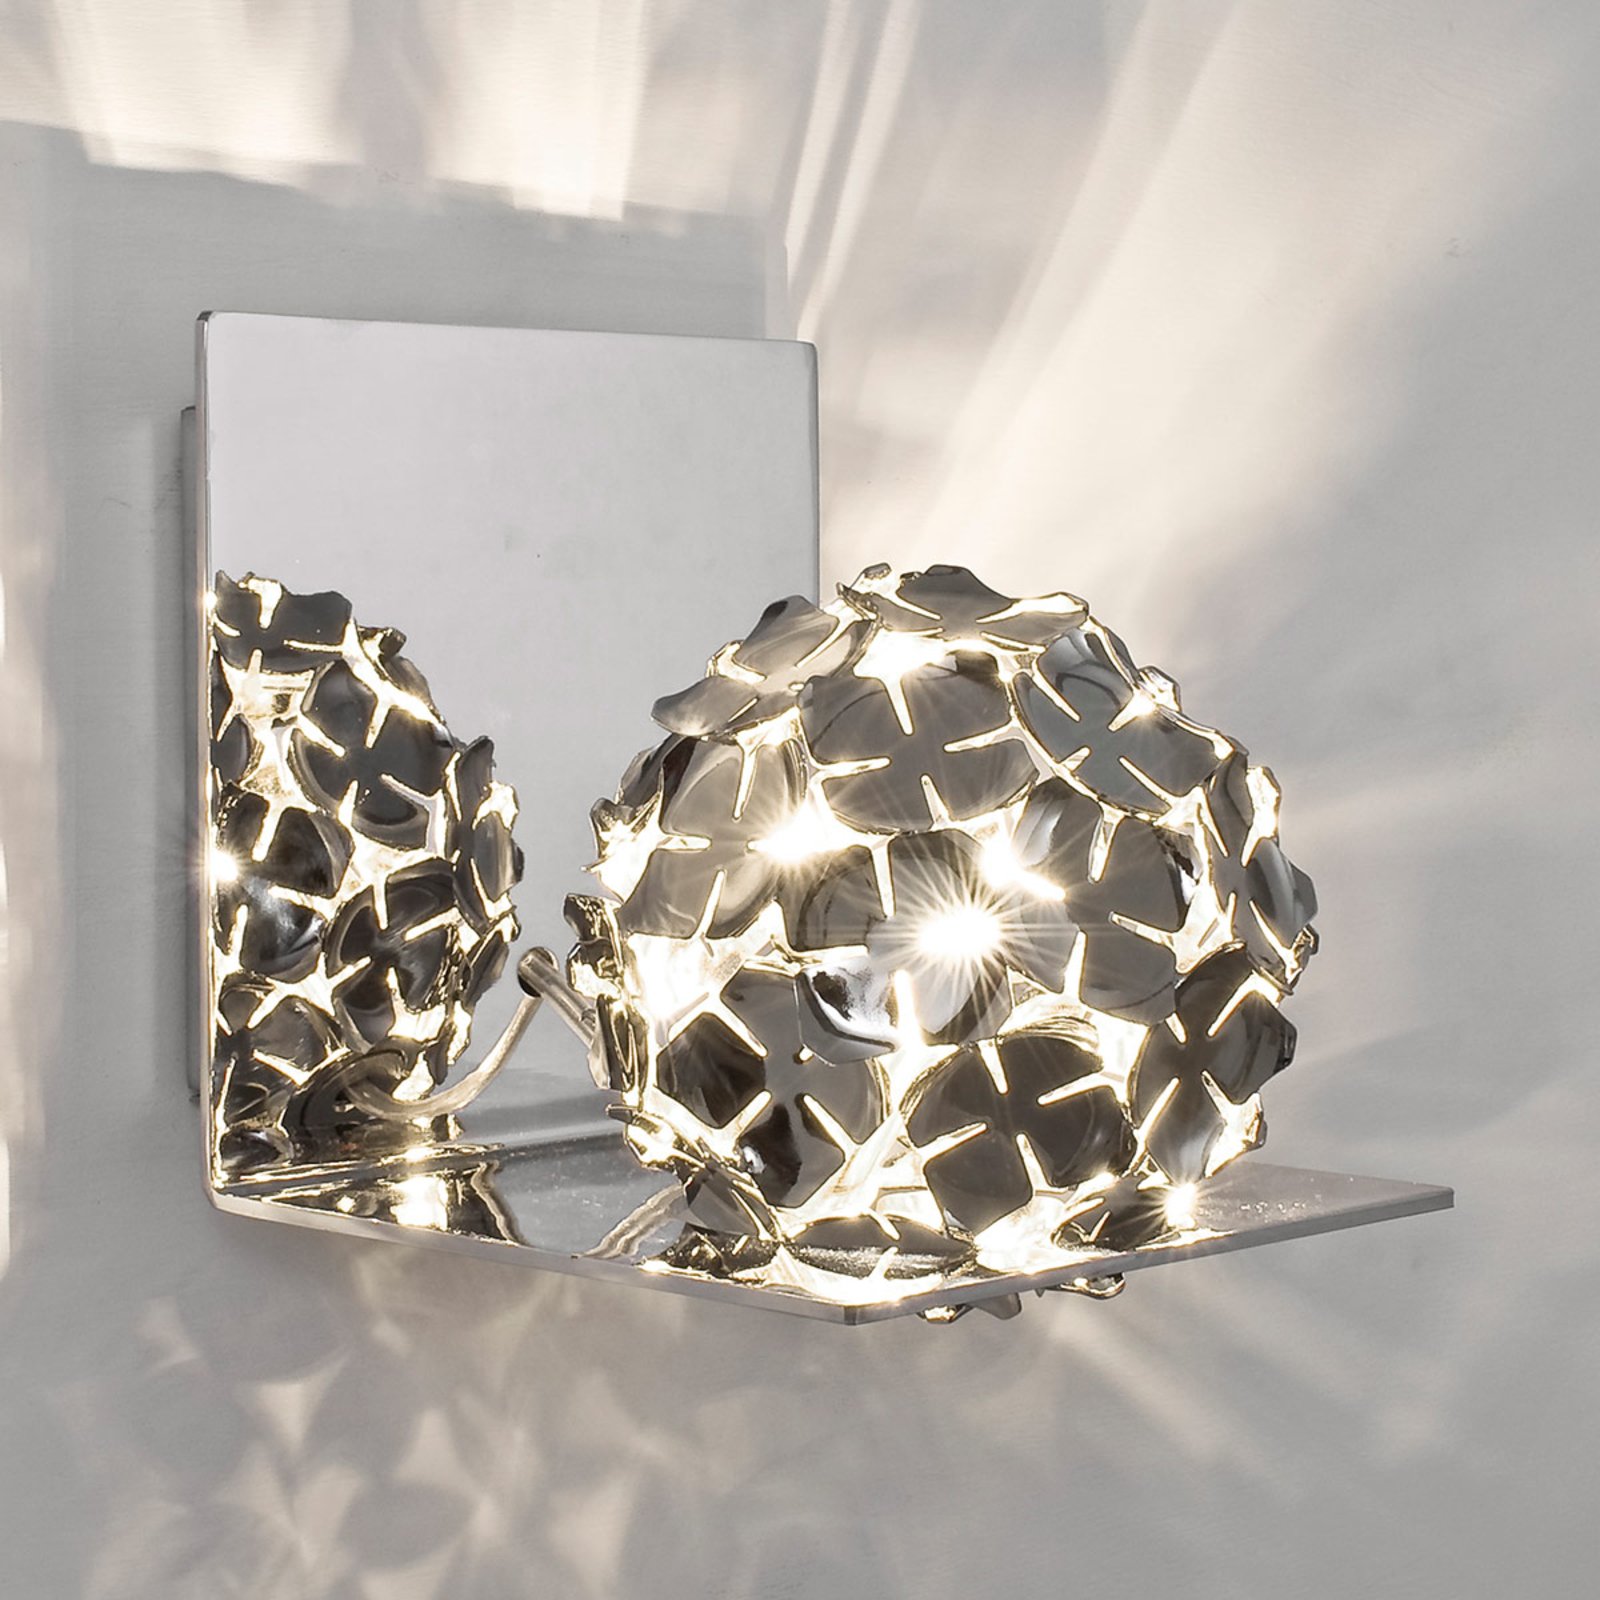 Ortenzia wall light with floral design